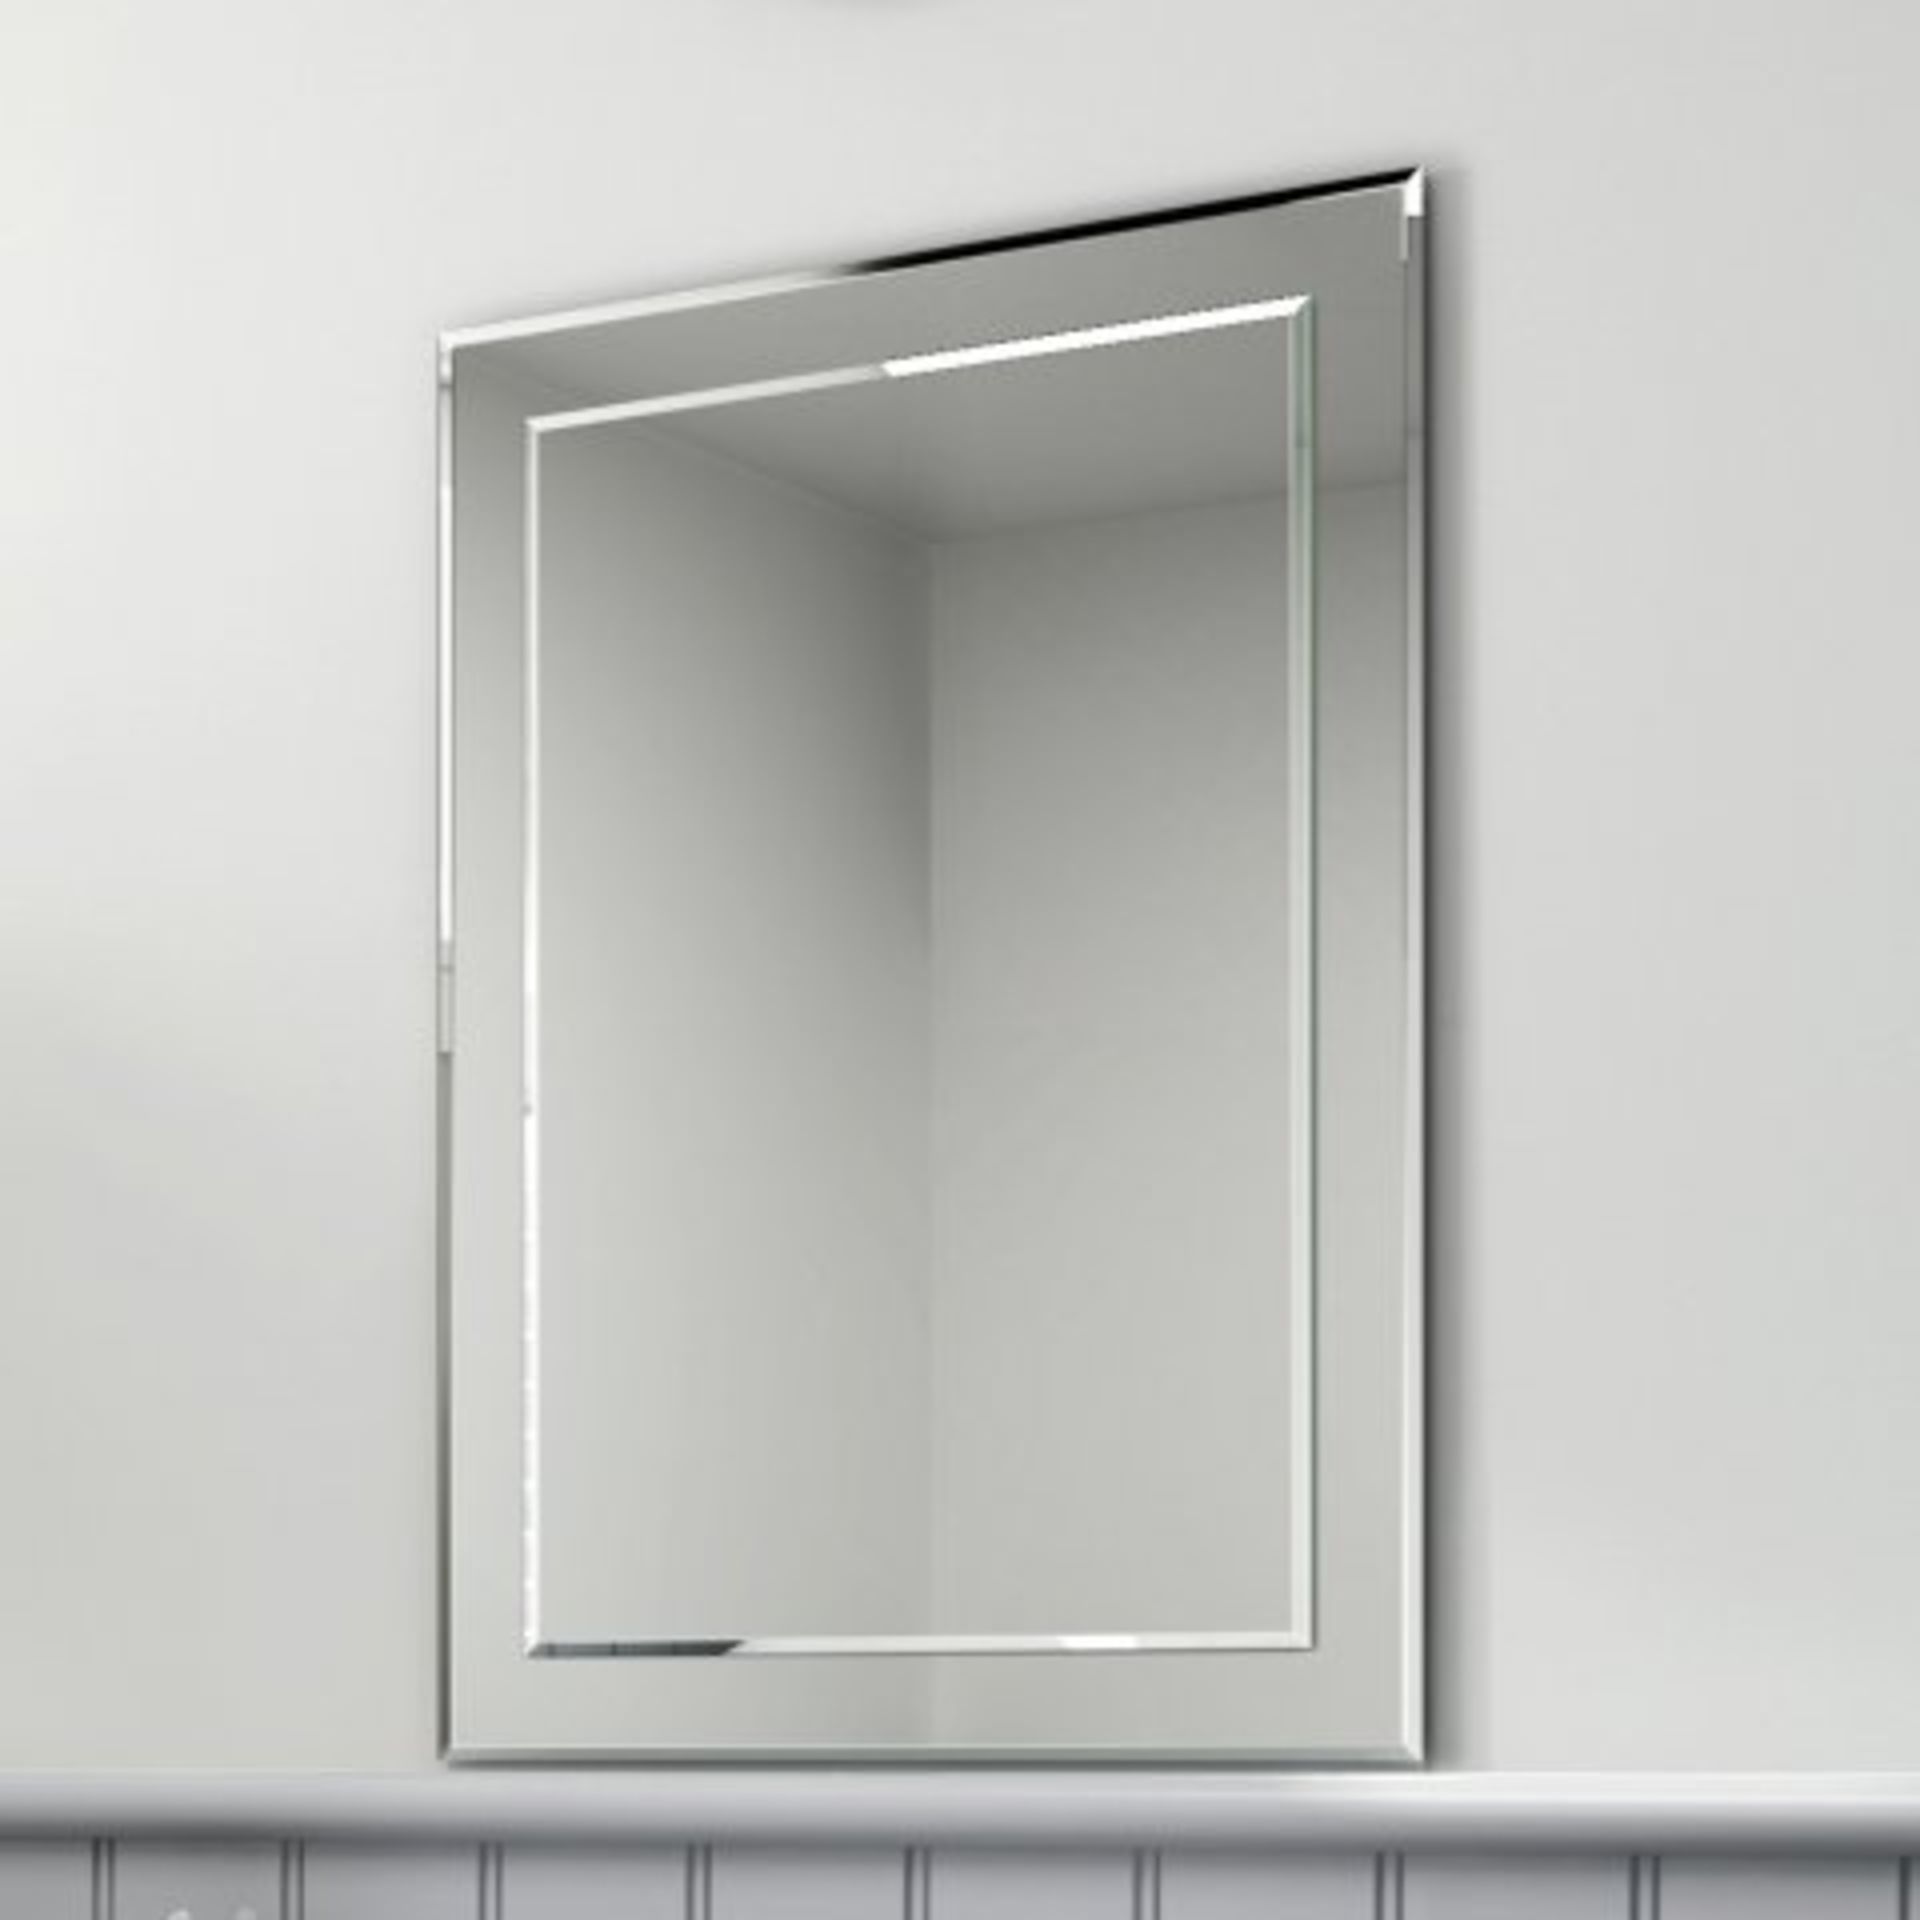 (W58) 500x700mm Bevel Mirror. RRP £199.99. Enjoy reflection perfection with our 500x700 Bevel Mirror